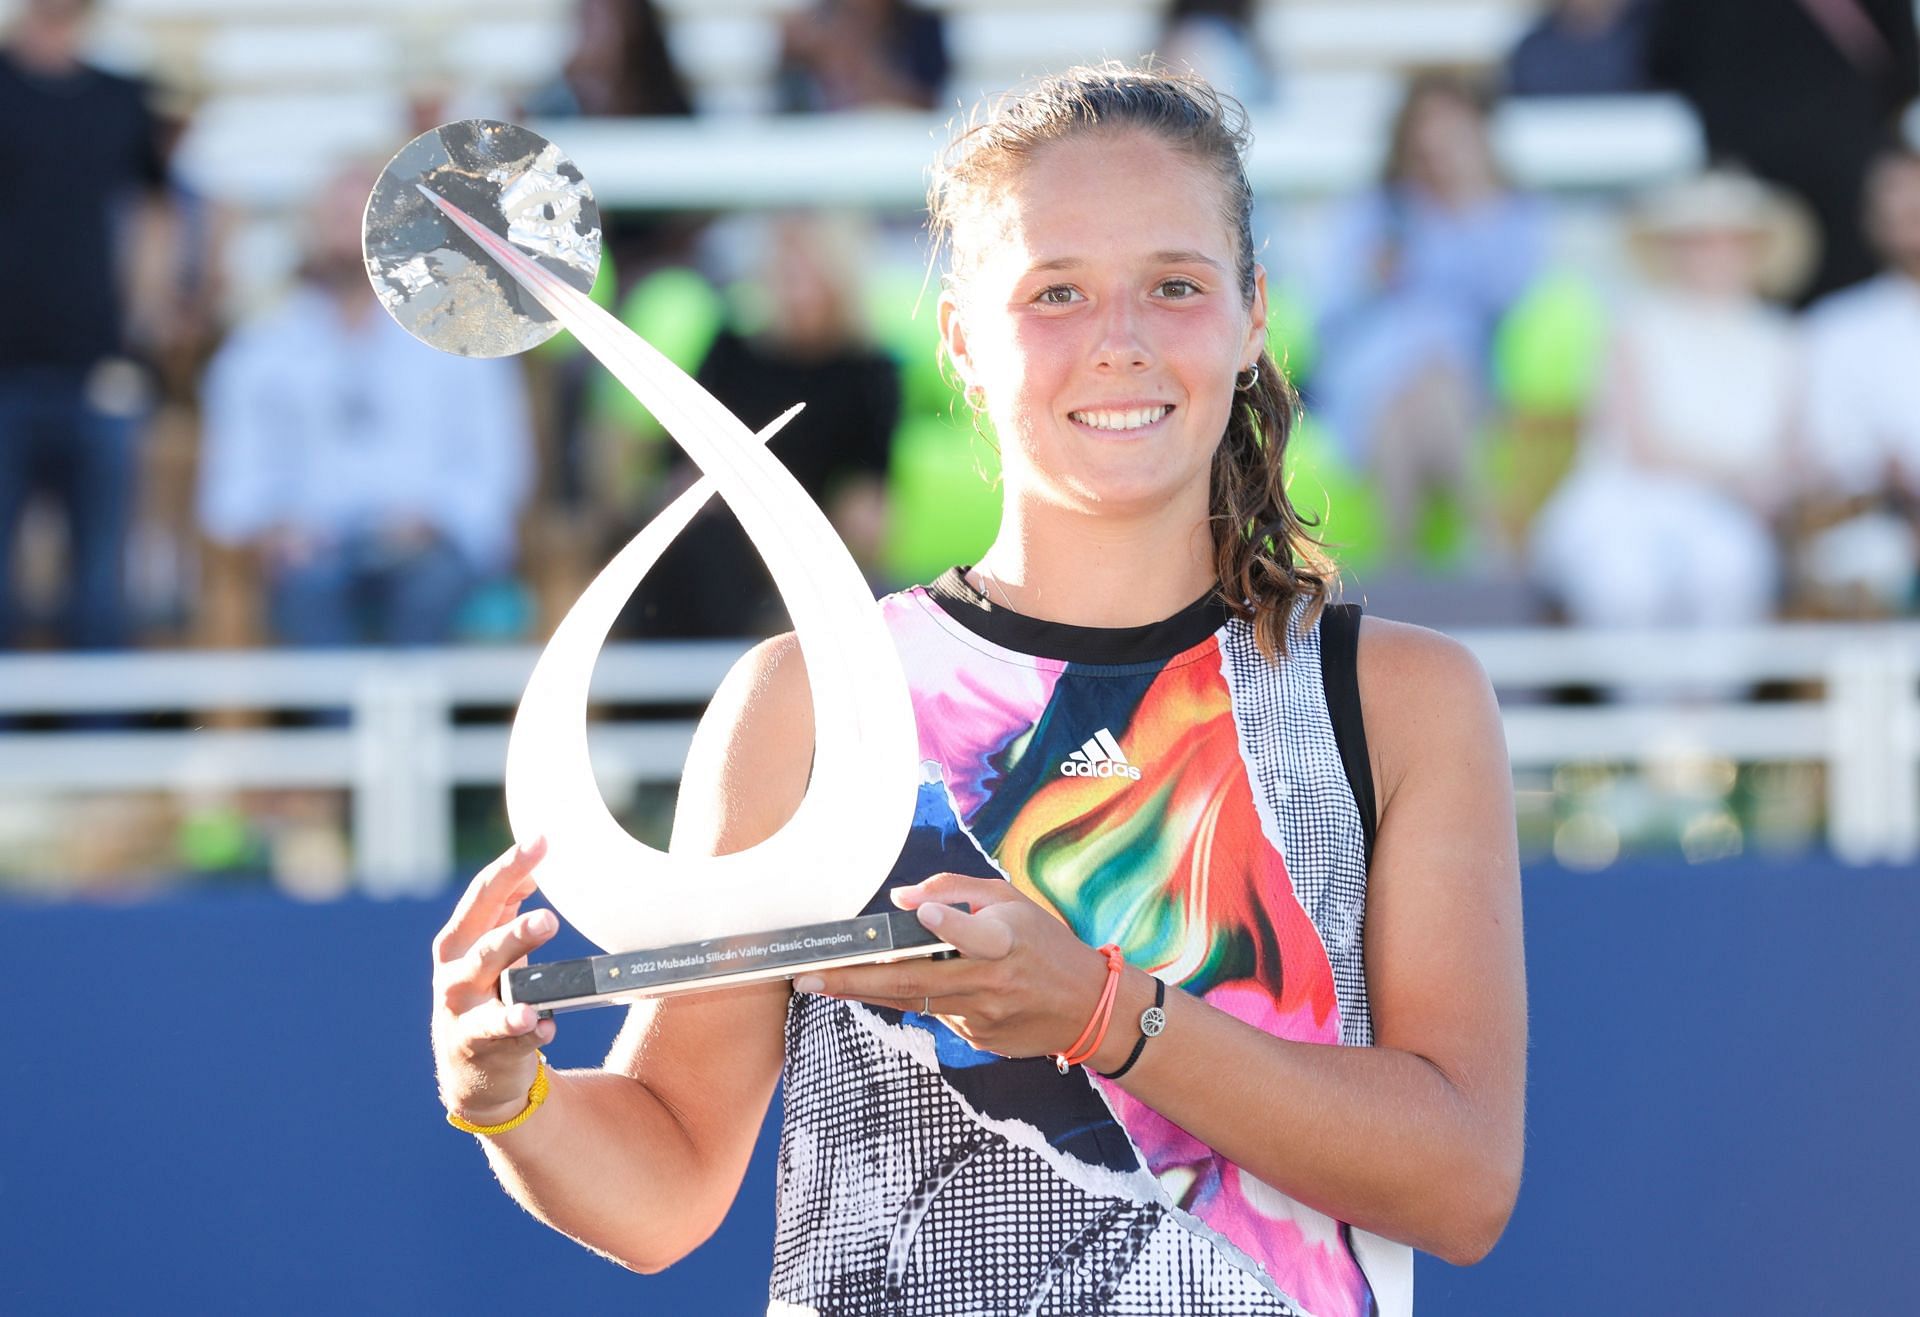 Daria Kasatkina poses with the trophy after clinching the Silicon Valley Classic title.